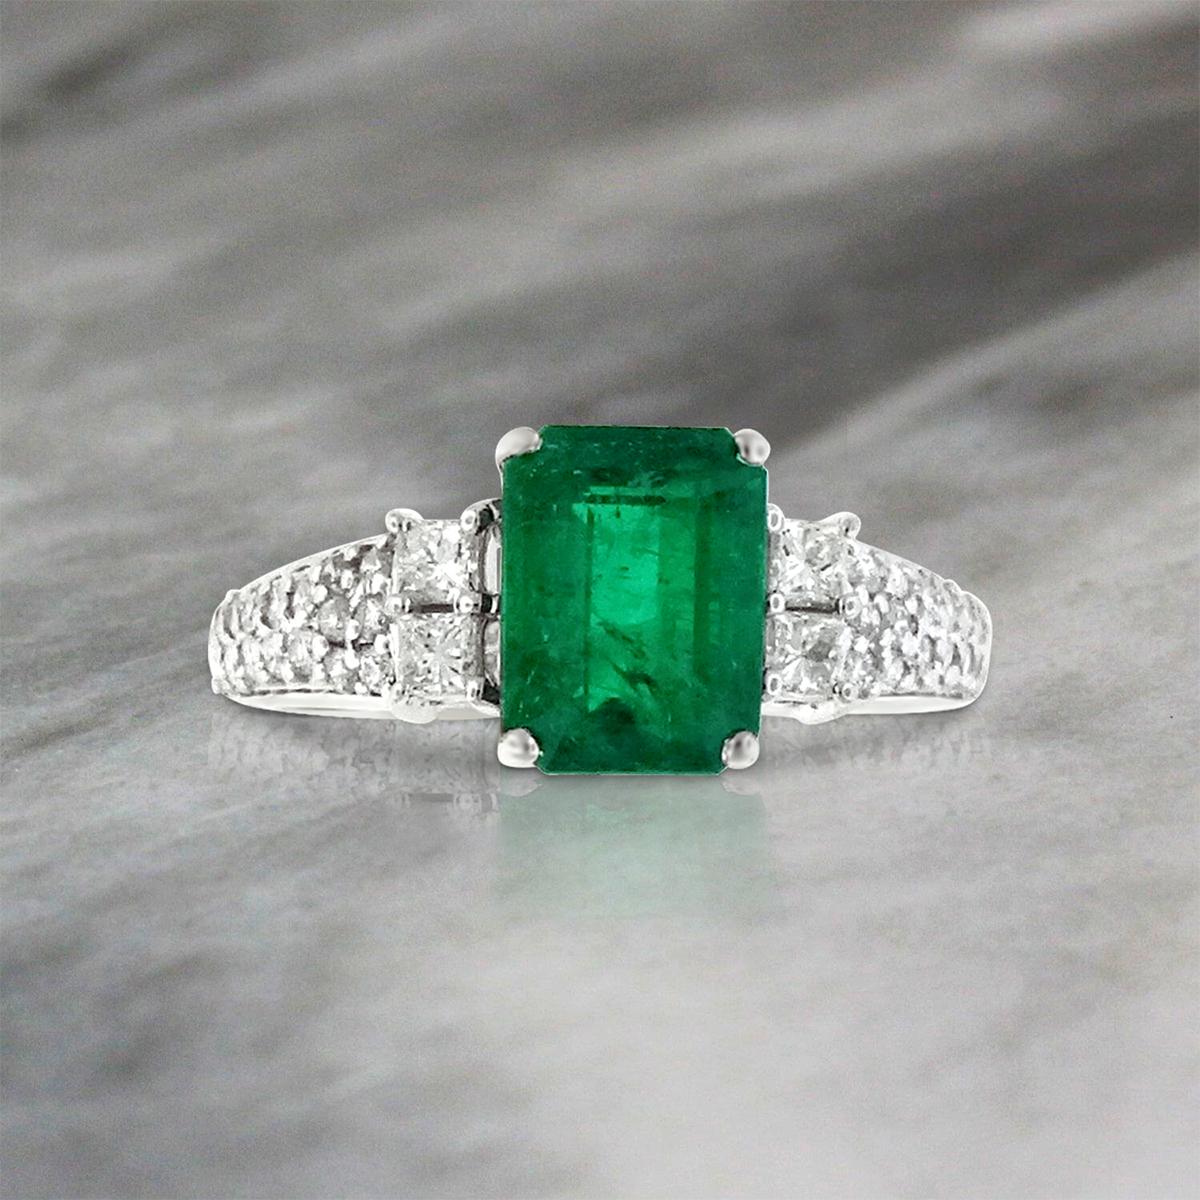 14K White Gold 1.62cts Emerald and Diamond Ring, Style# R3057 In New Condition For Sale In New York, NY